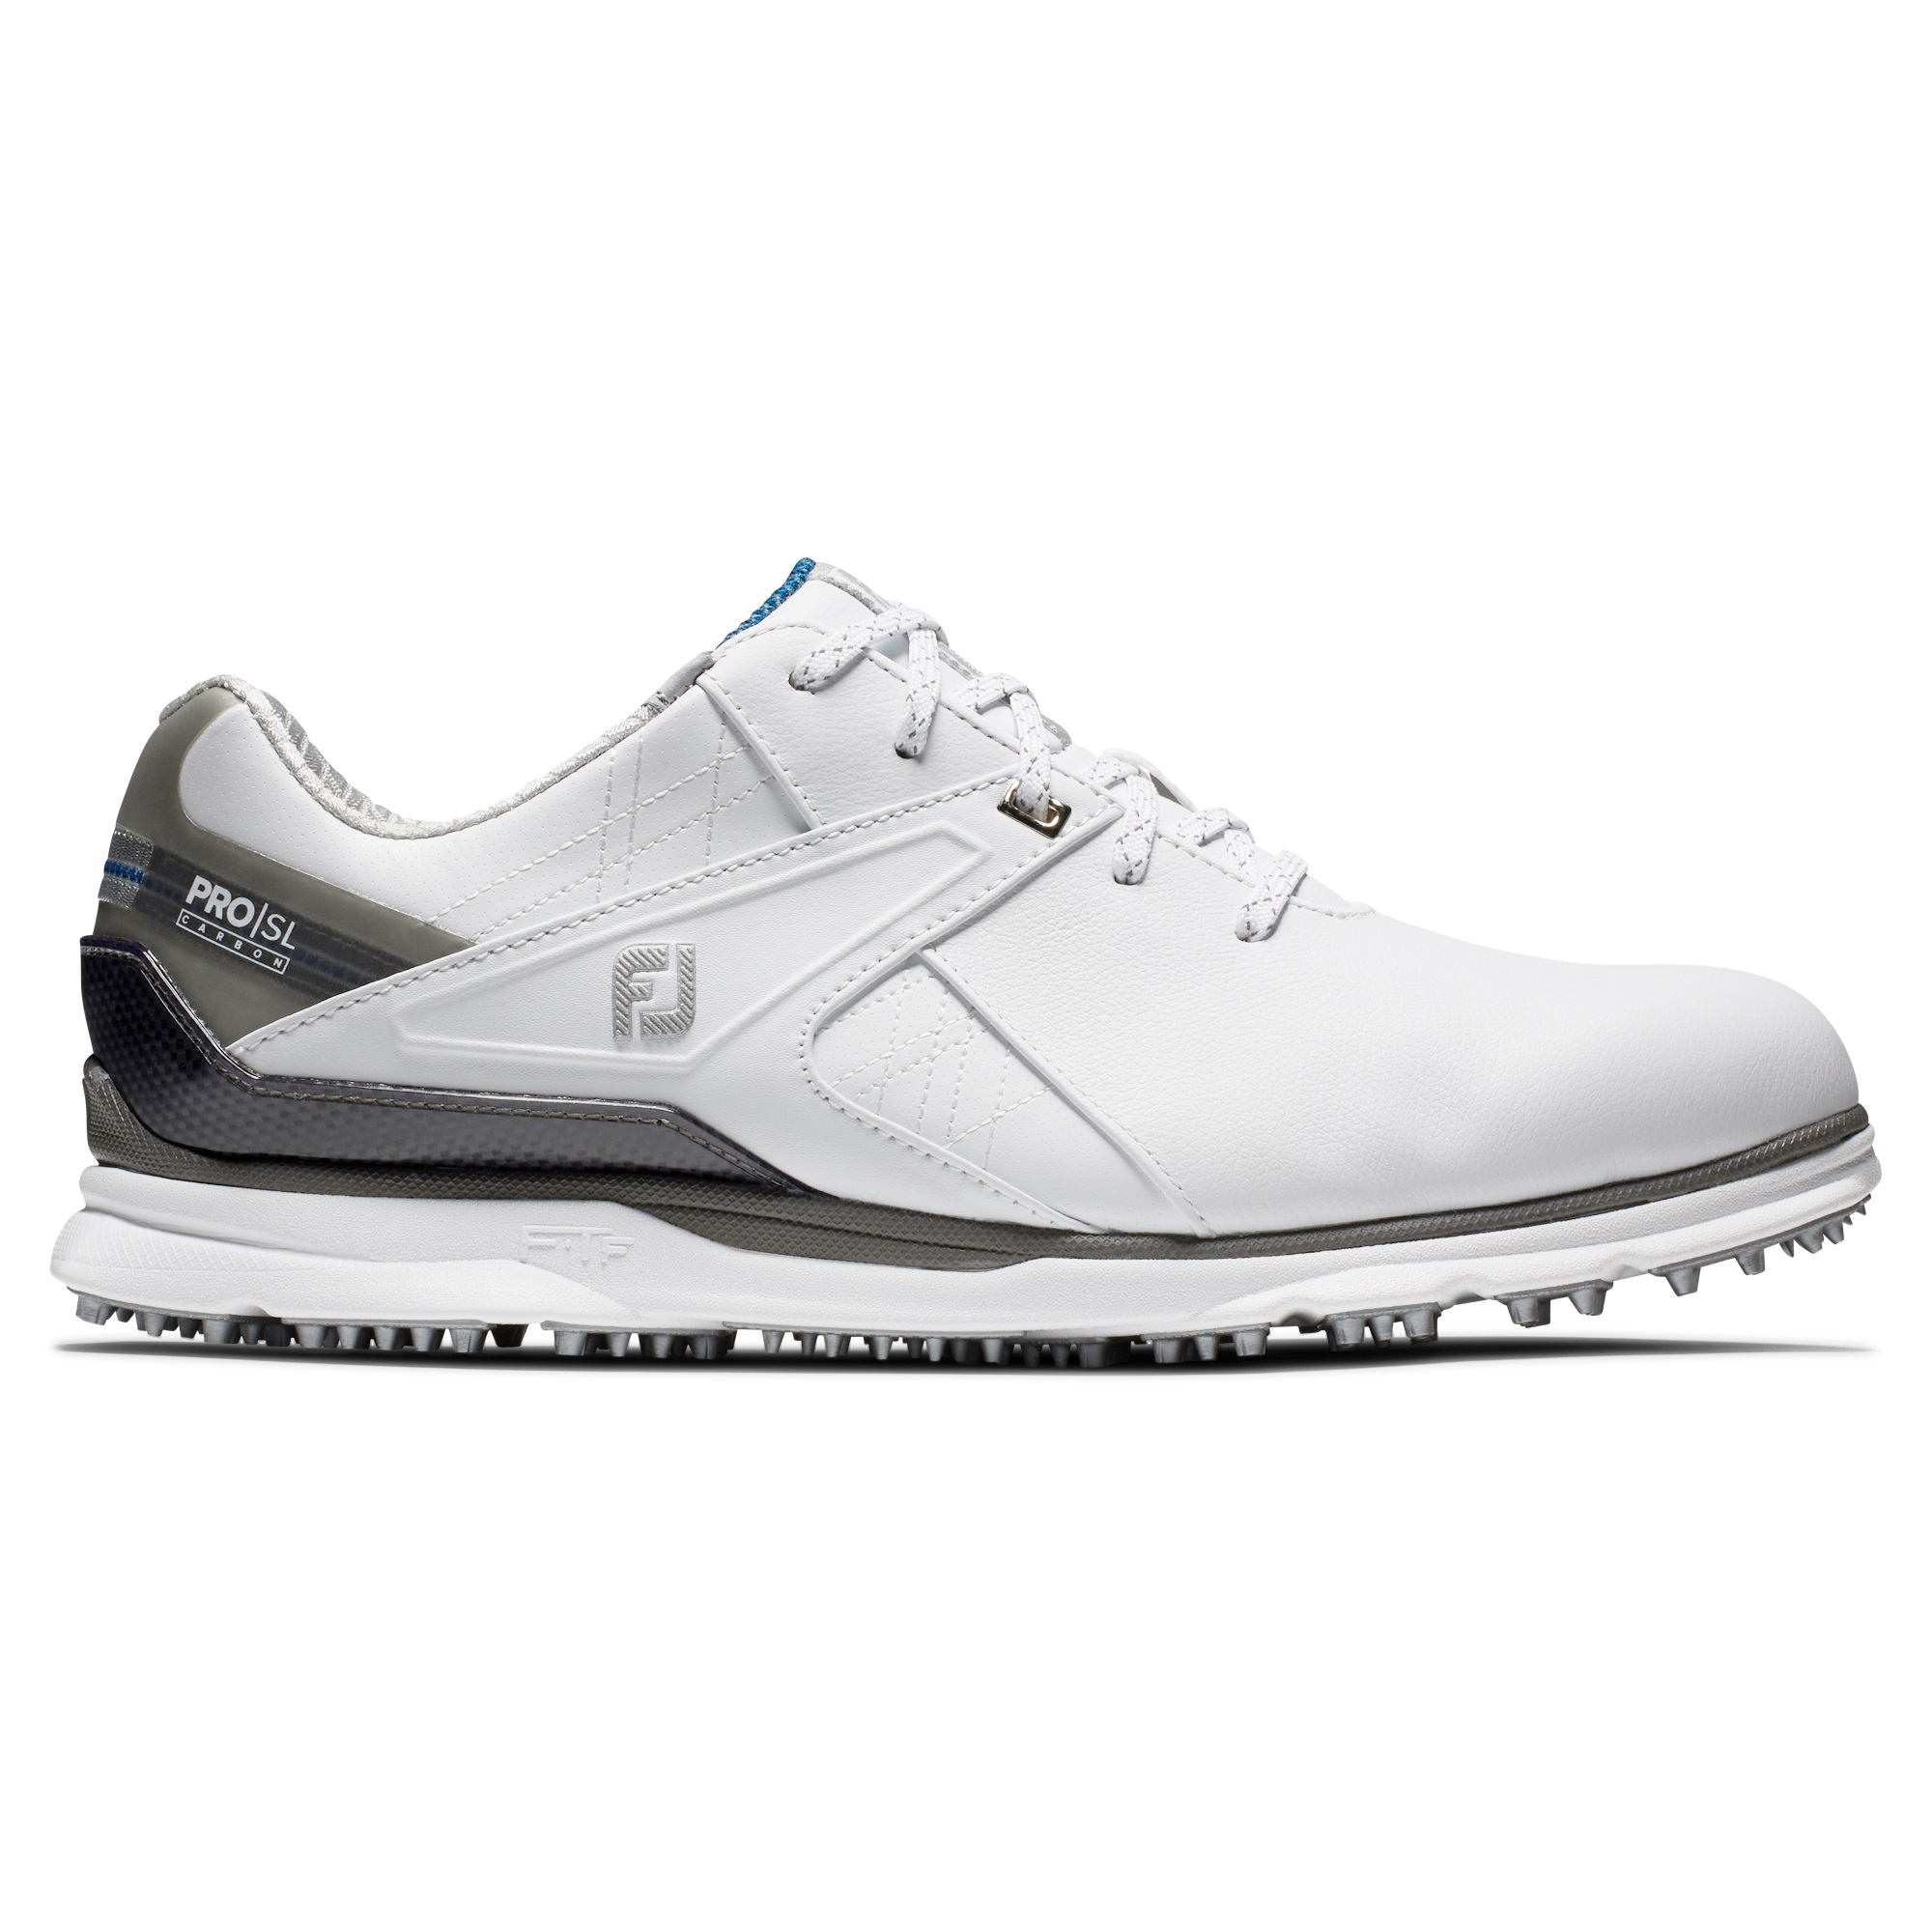 FootJoy Golf Shoes And Golf Apparel